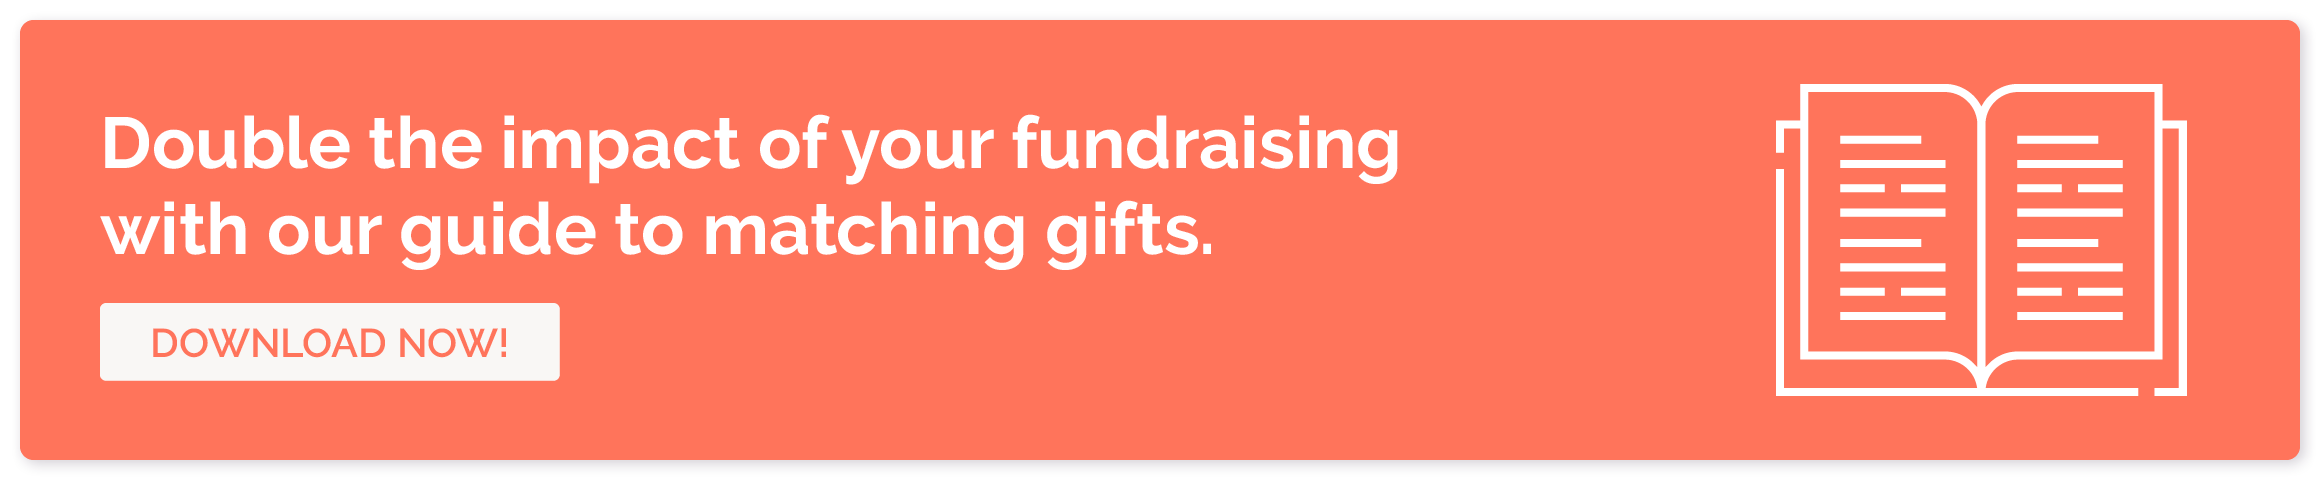 Double the impact of your fundraising with our guide to matching gifts. Download now!